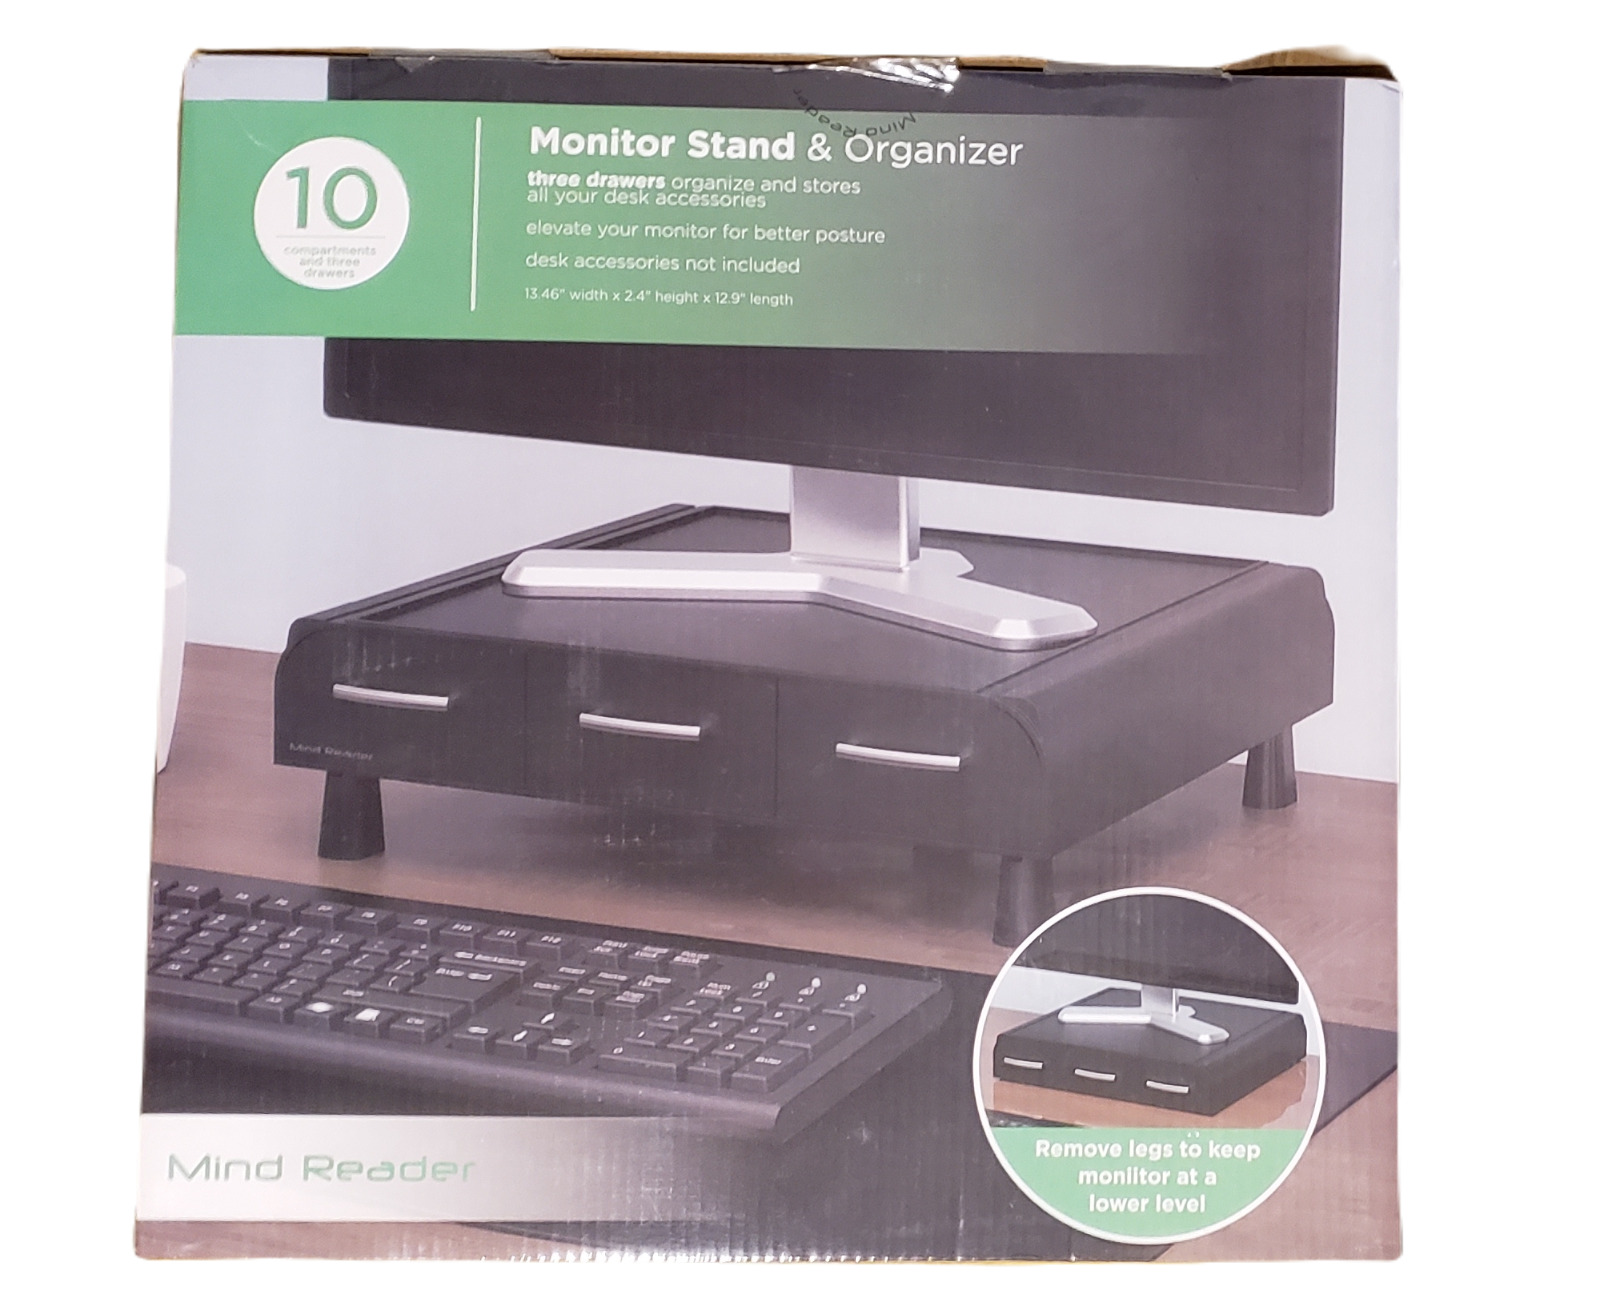 Mind Reader Monitor Stand and Desk Organizer for PC or Laptop, Black